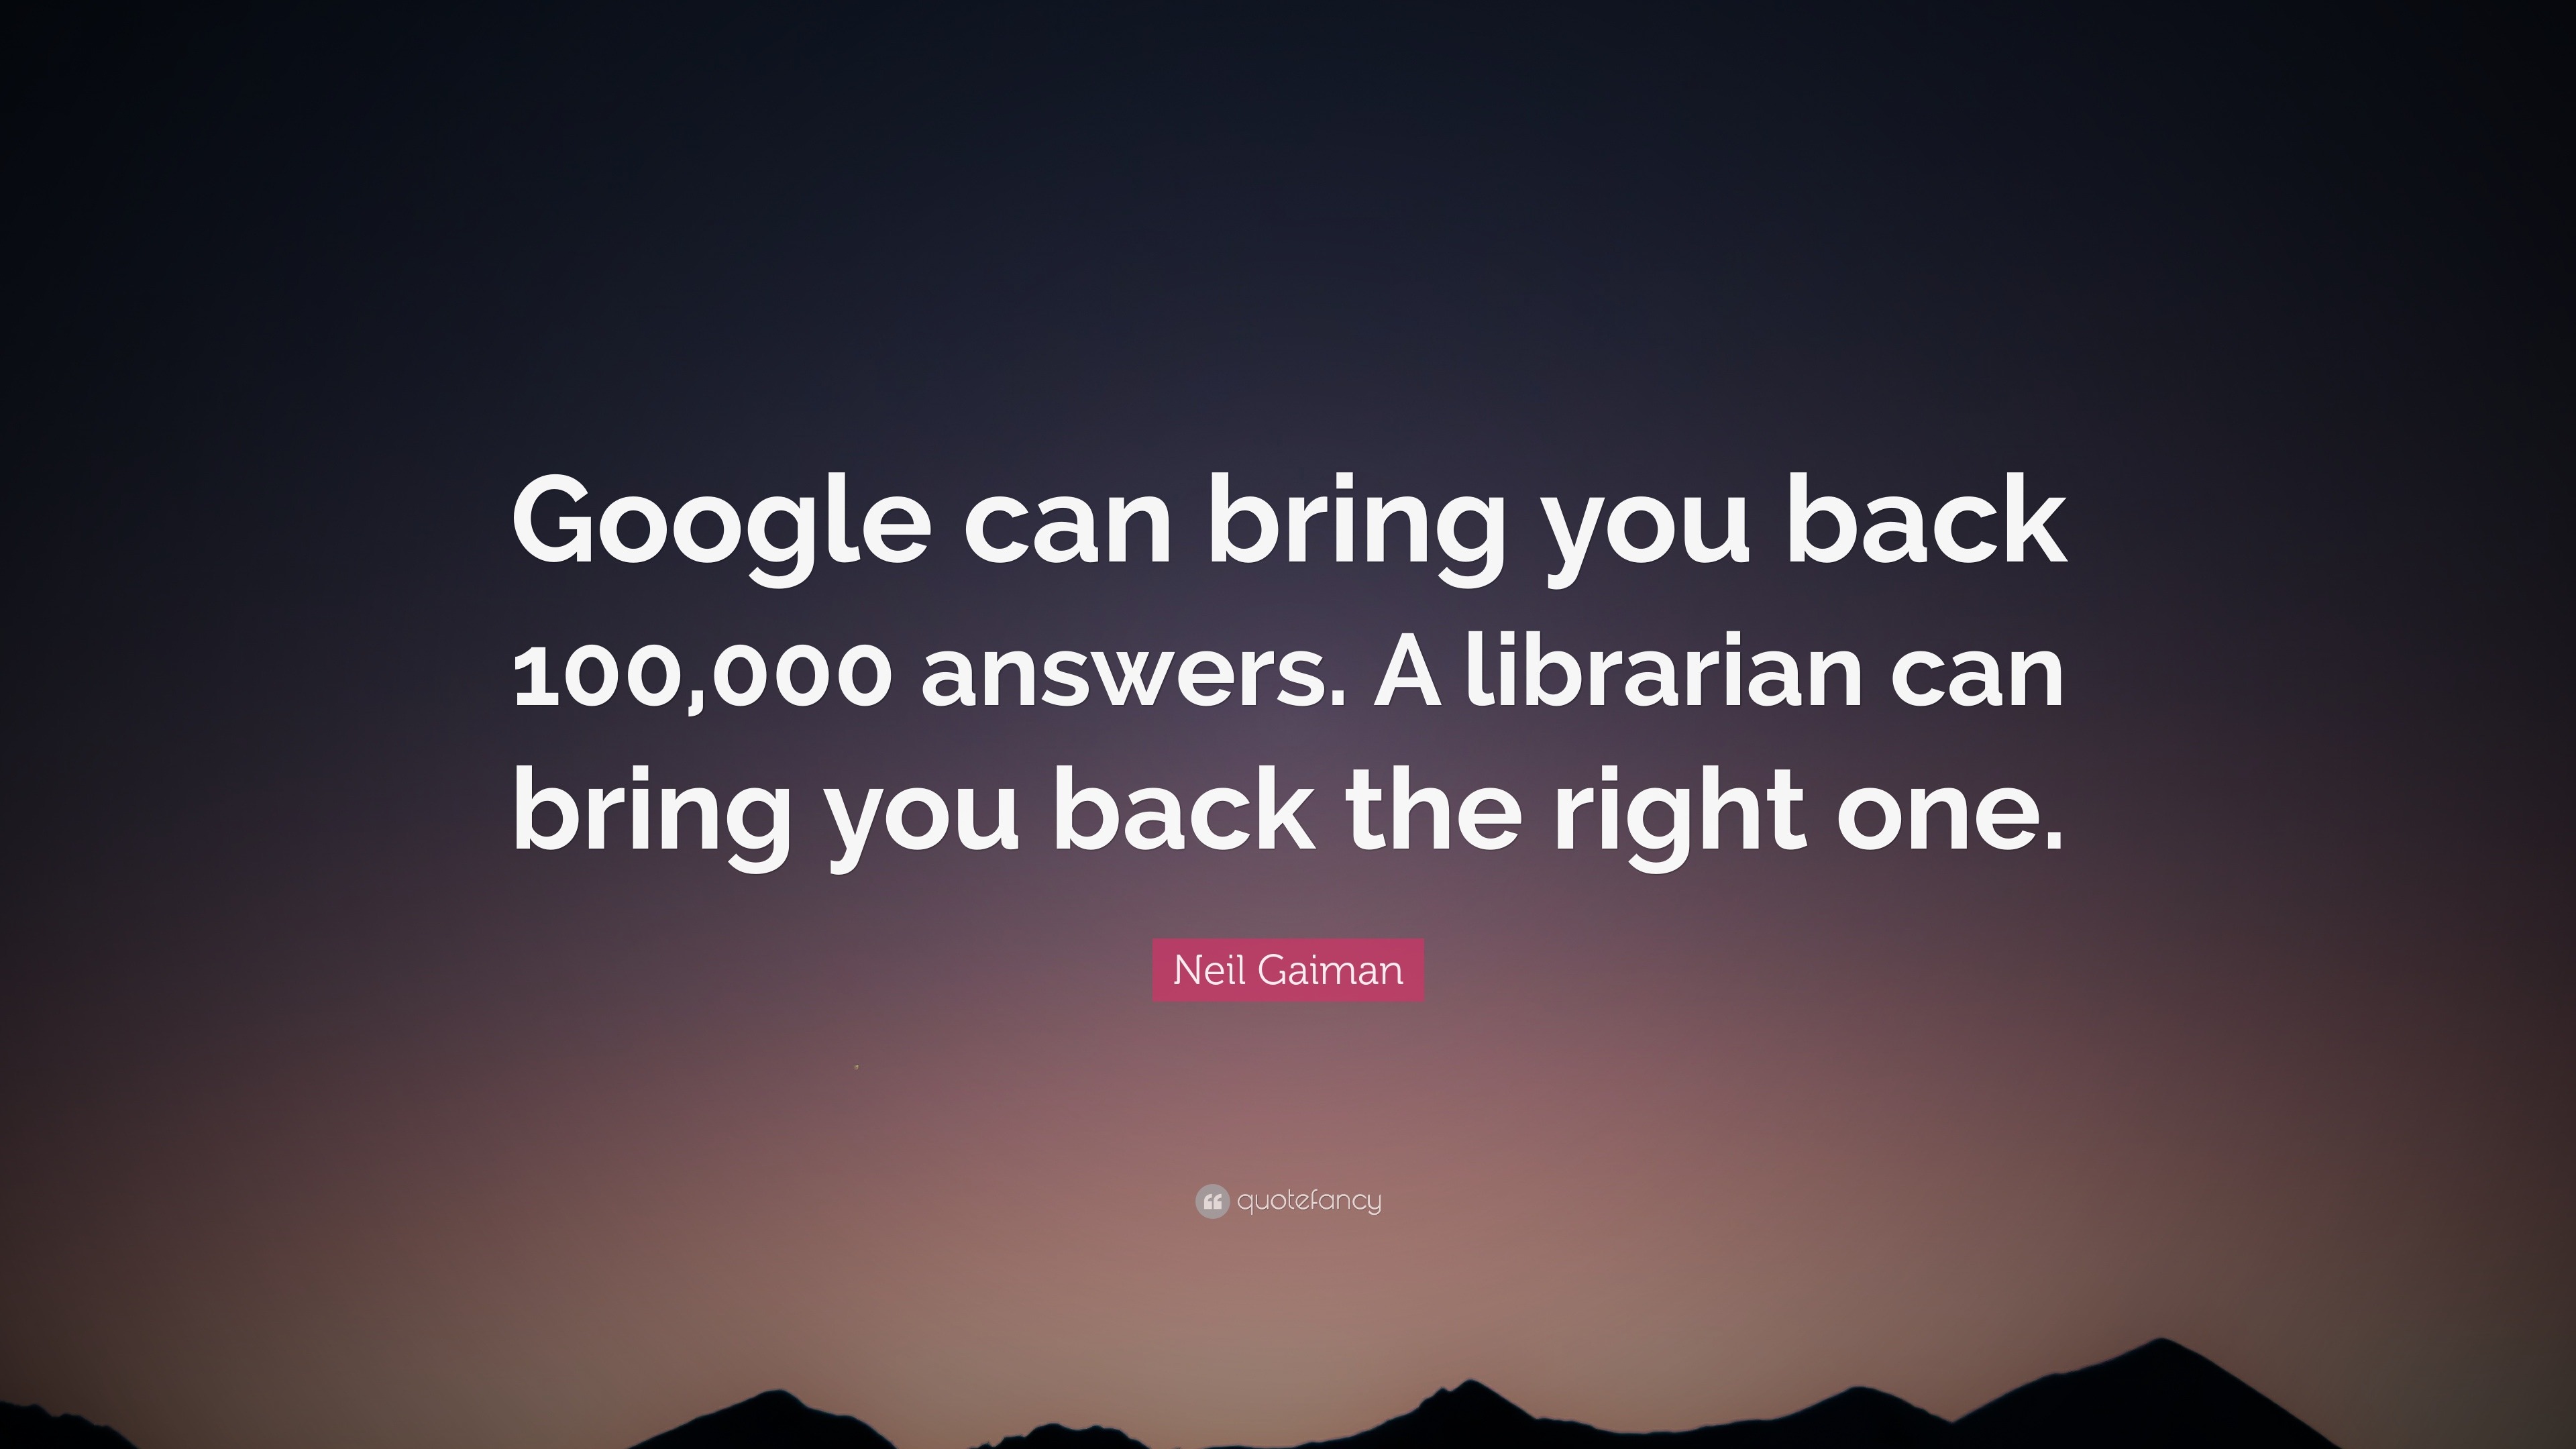 Neil Gaiman Quote: “Google can bring you back 100,000 answers. A